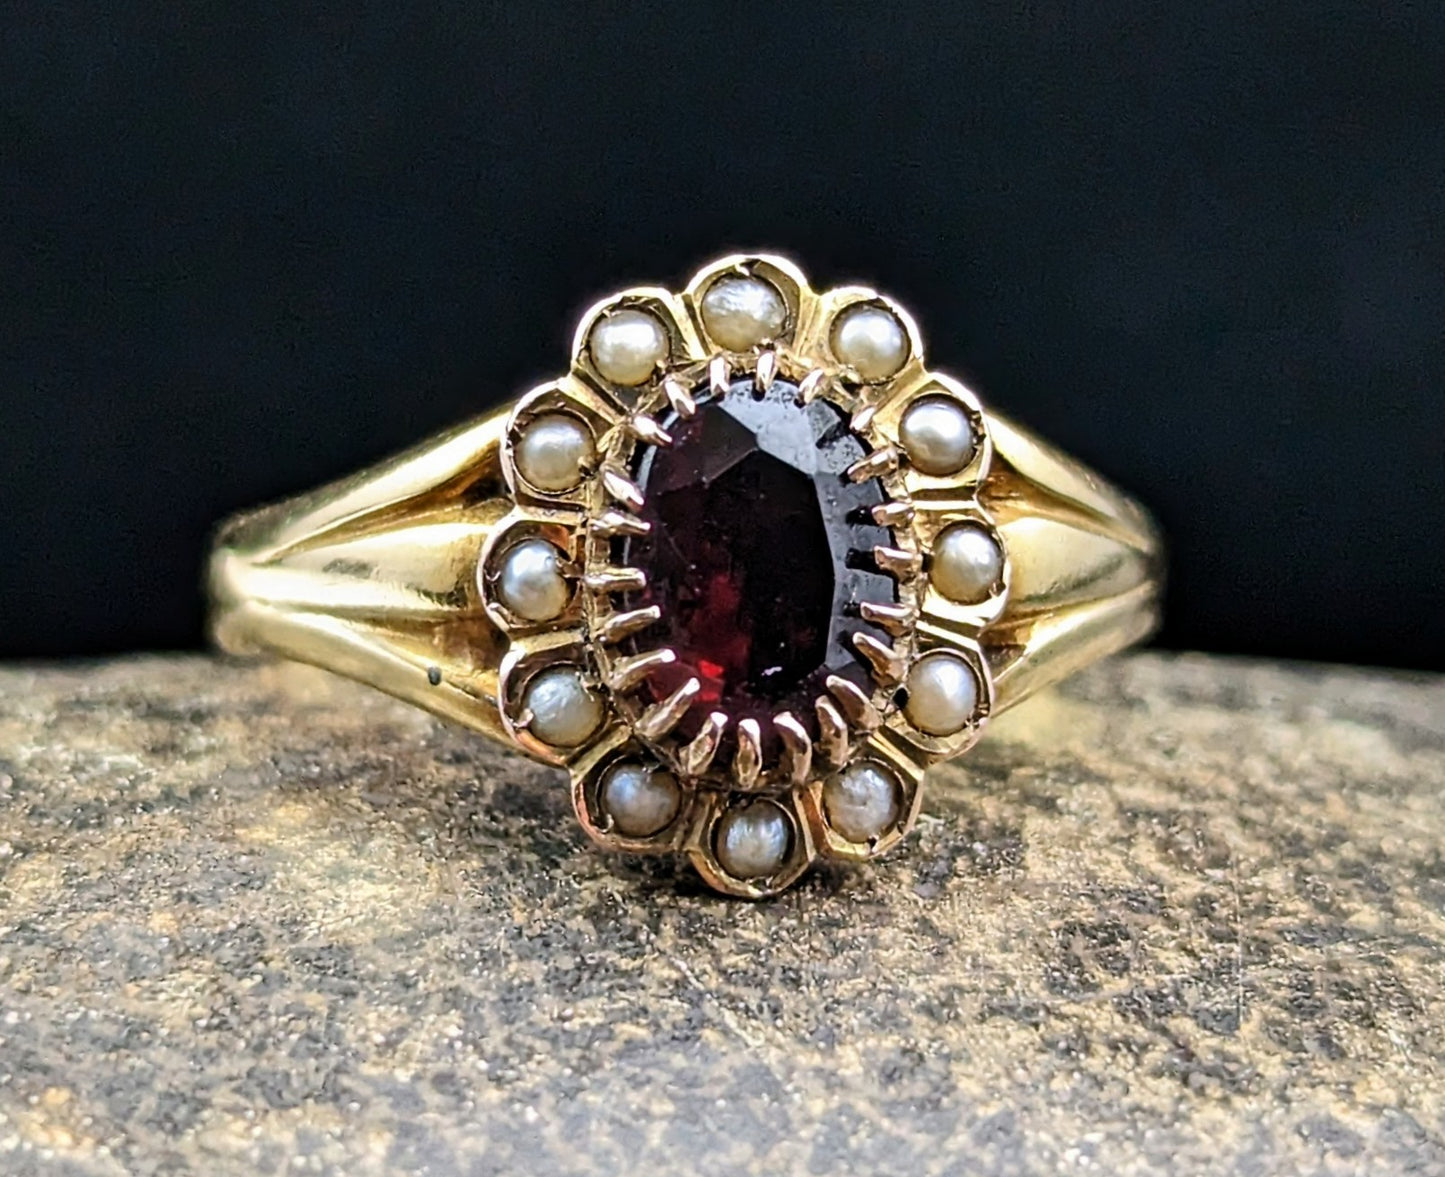 Antique Garnet and Pearl cluster ring, 18ct yellow gold, Edwardian